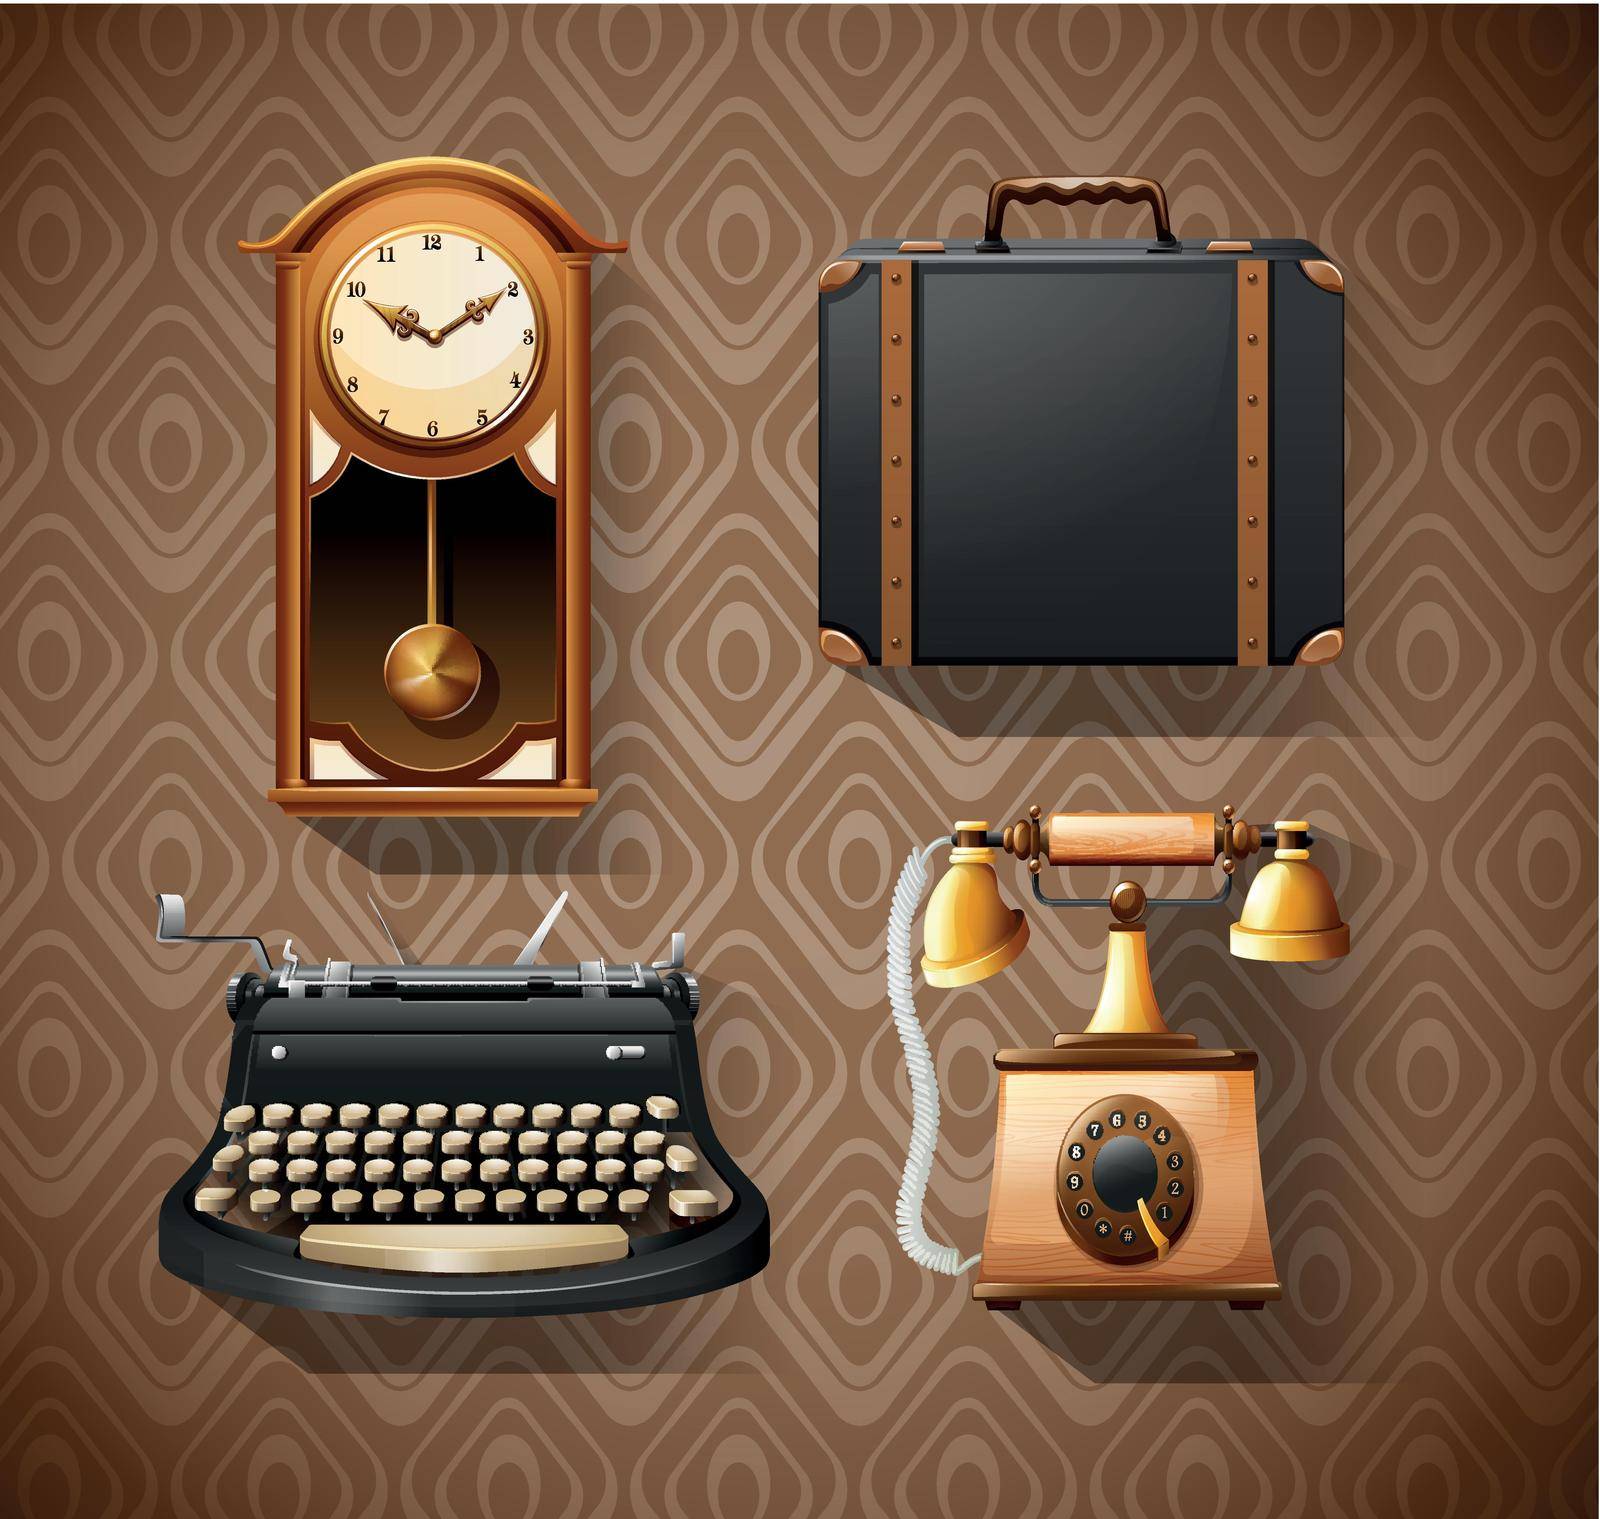 Household objects in vintage styles by iimages